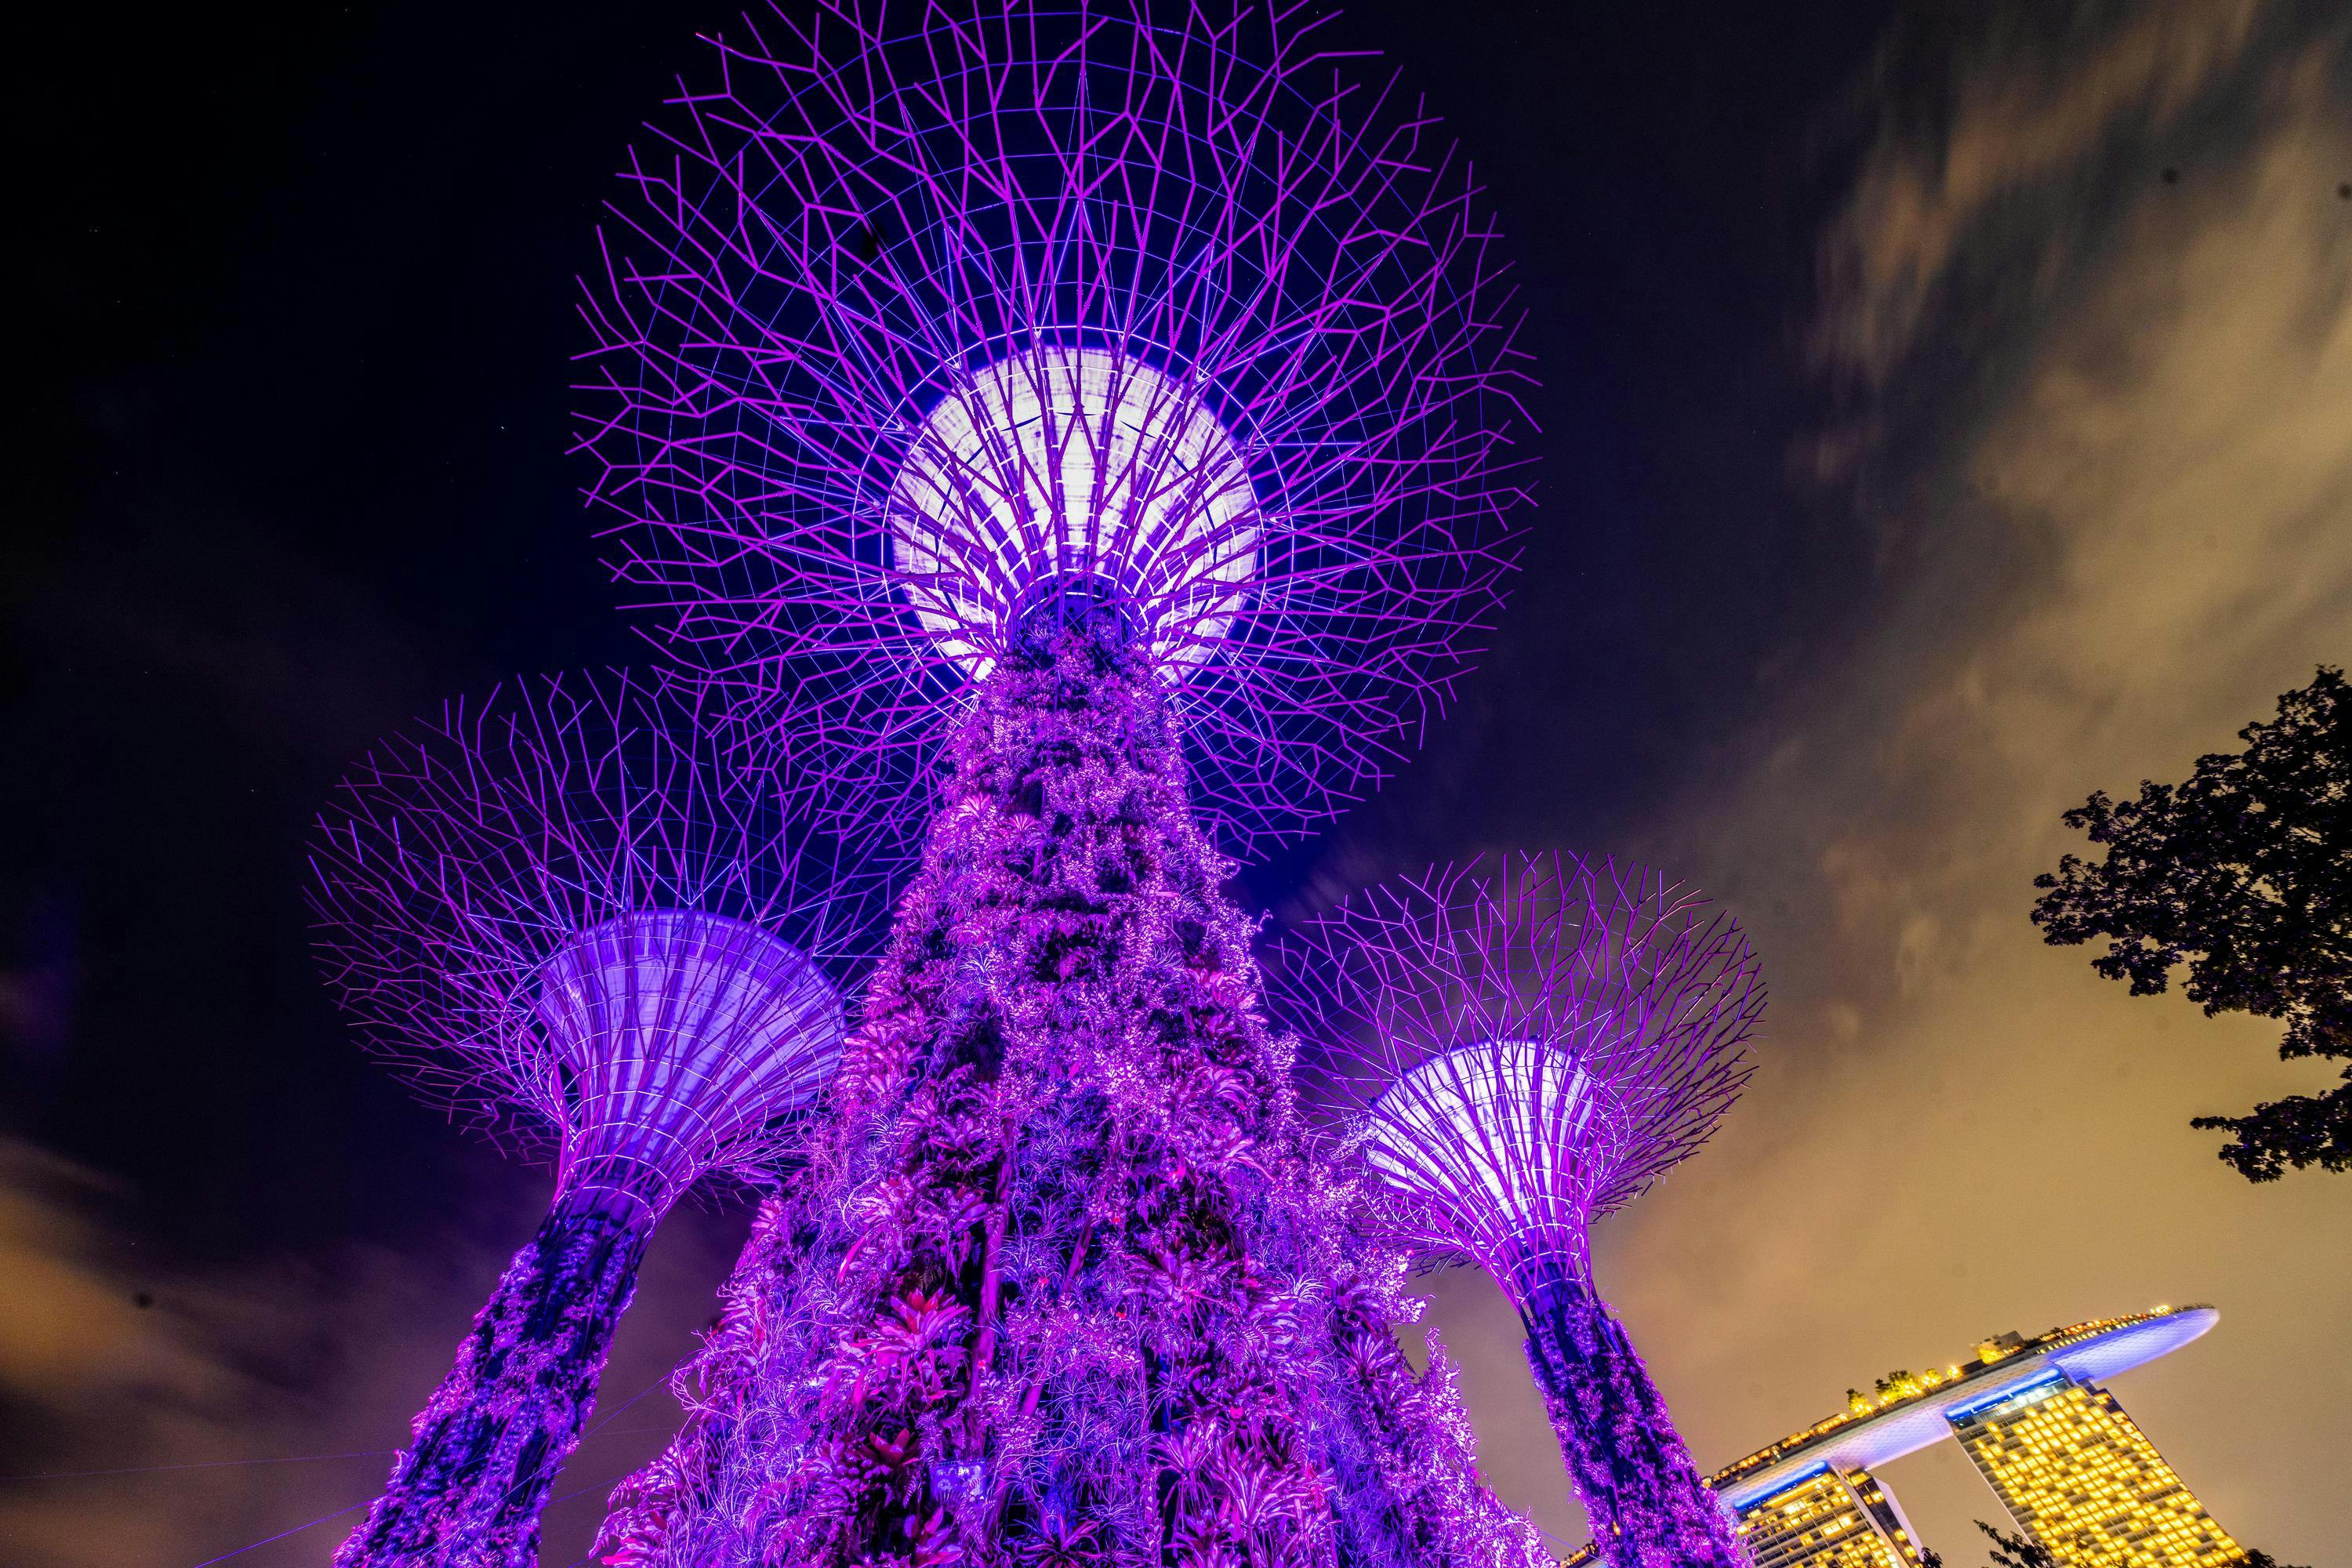 The Gardens by the Bay is a nature park spanning 250 acres consisting of three waterfront gardens: Bay South Garden, Bay East Garden and Bay Central Garden. Singapore